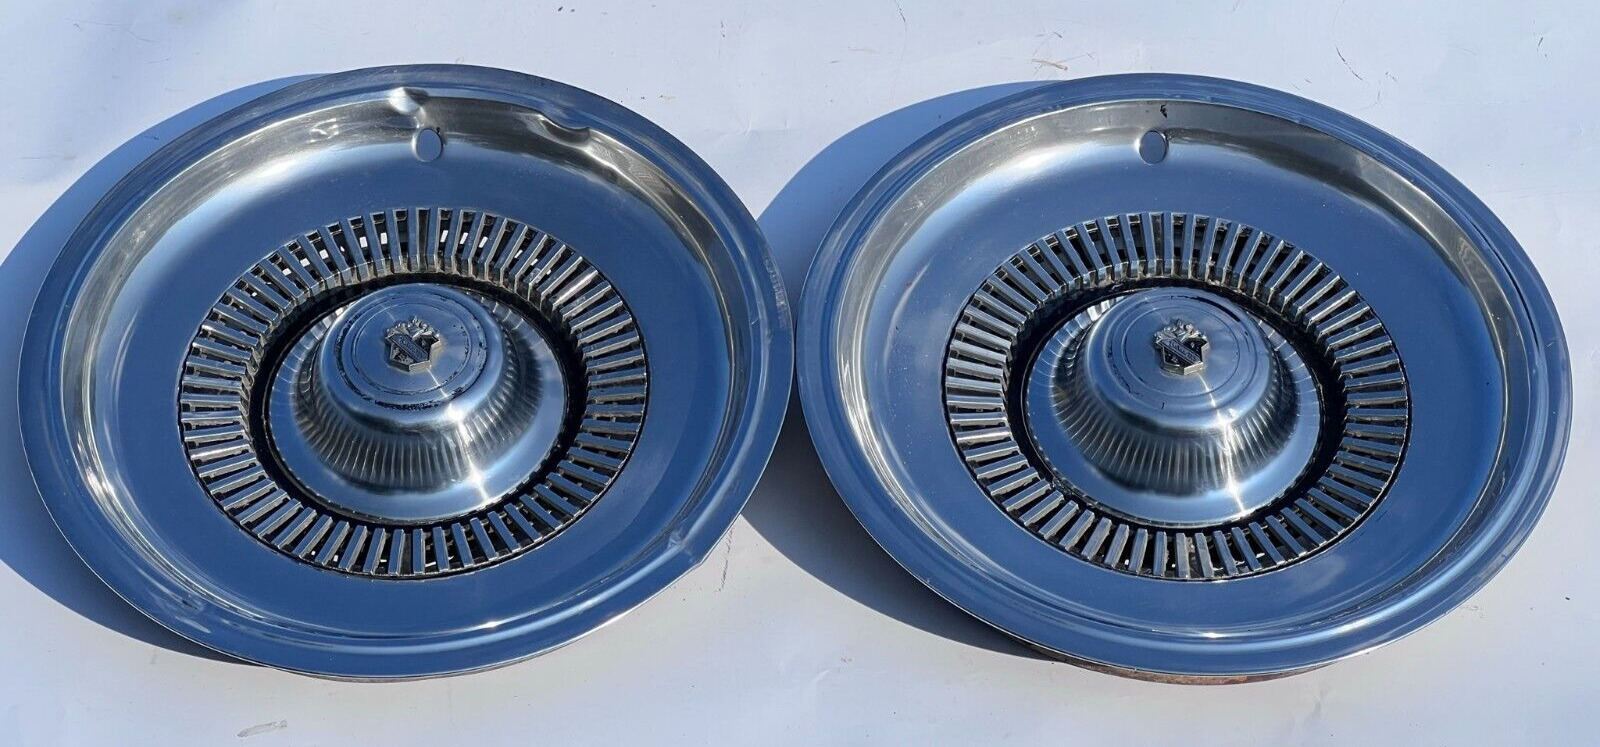 1969 1970 BUICK ELECTRA 225 HUBCAPS WHEEL COVERS PAIR